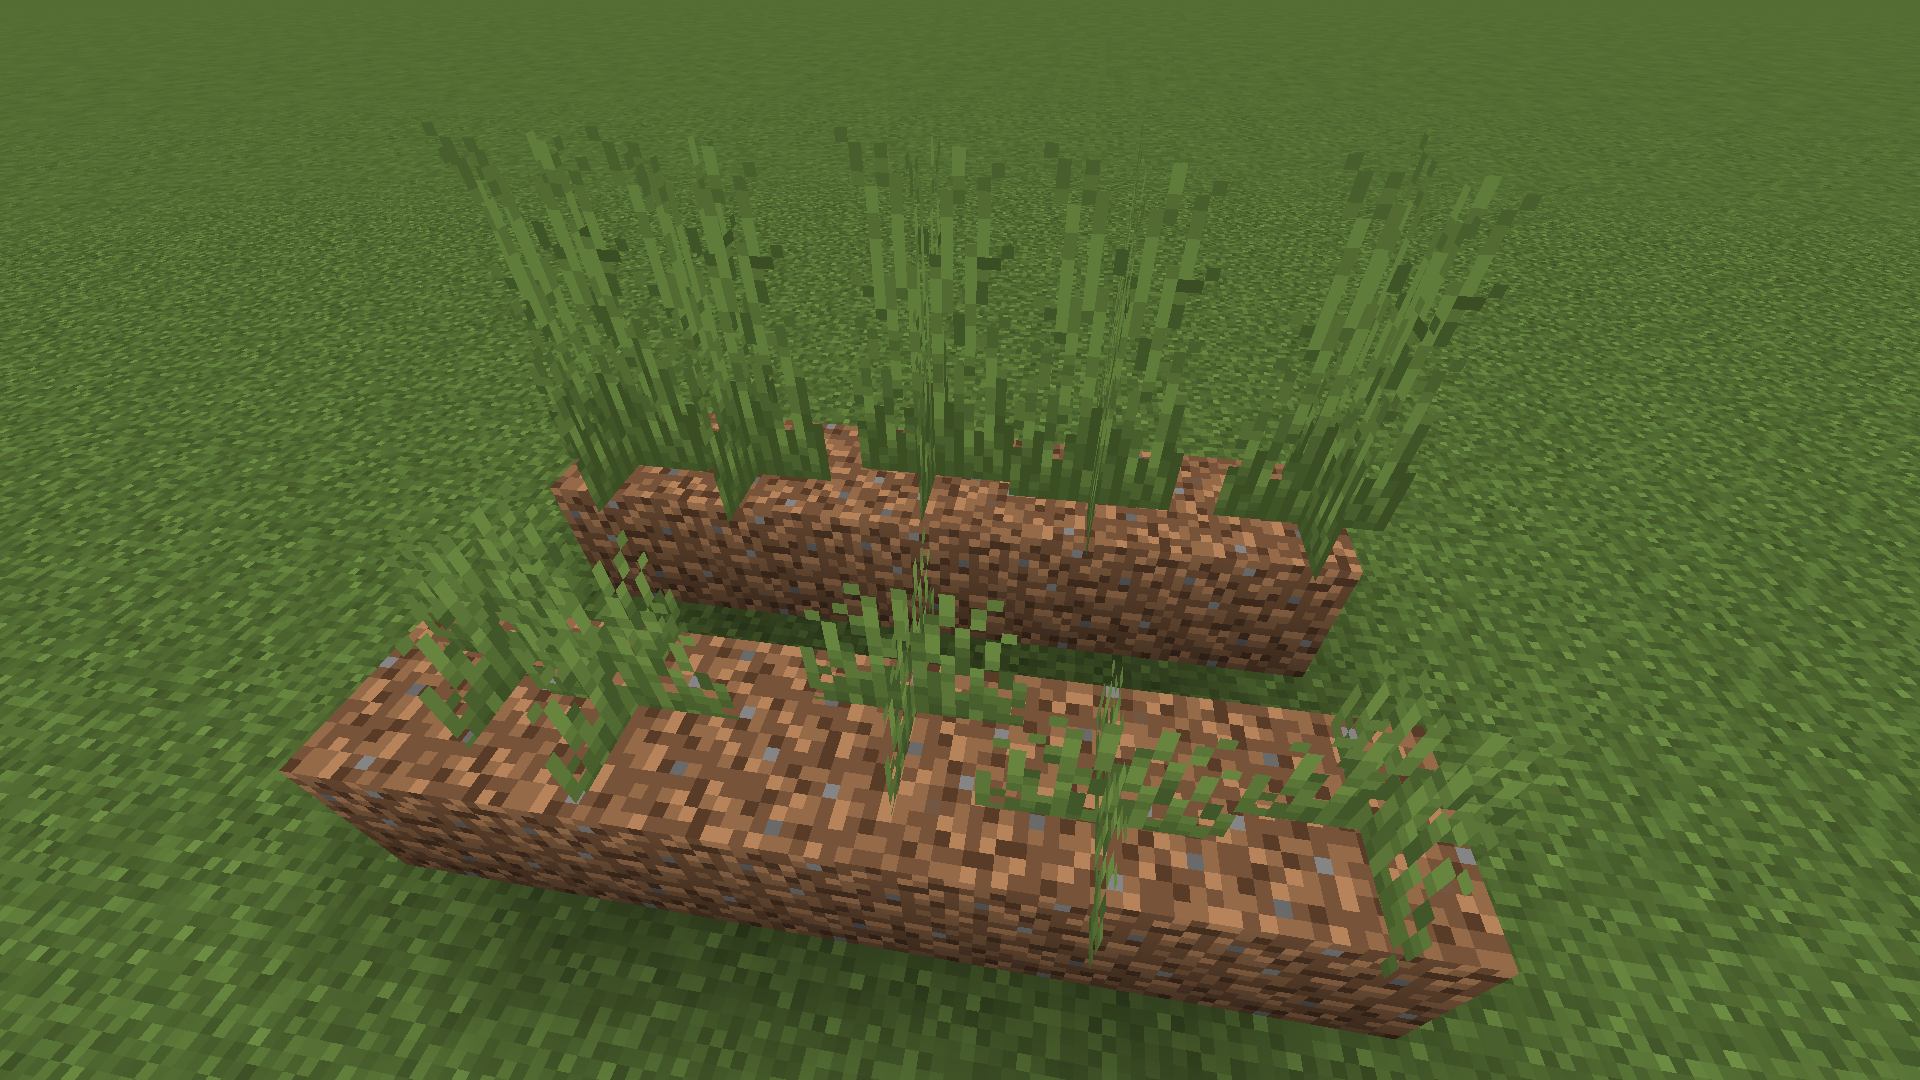 Image of the changed grass models